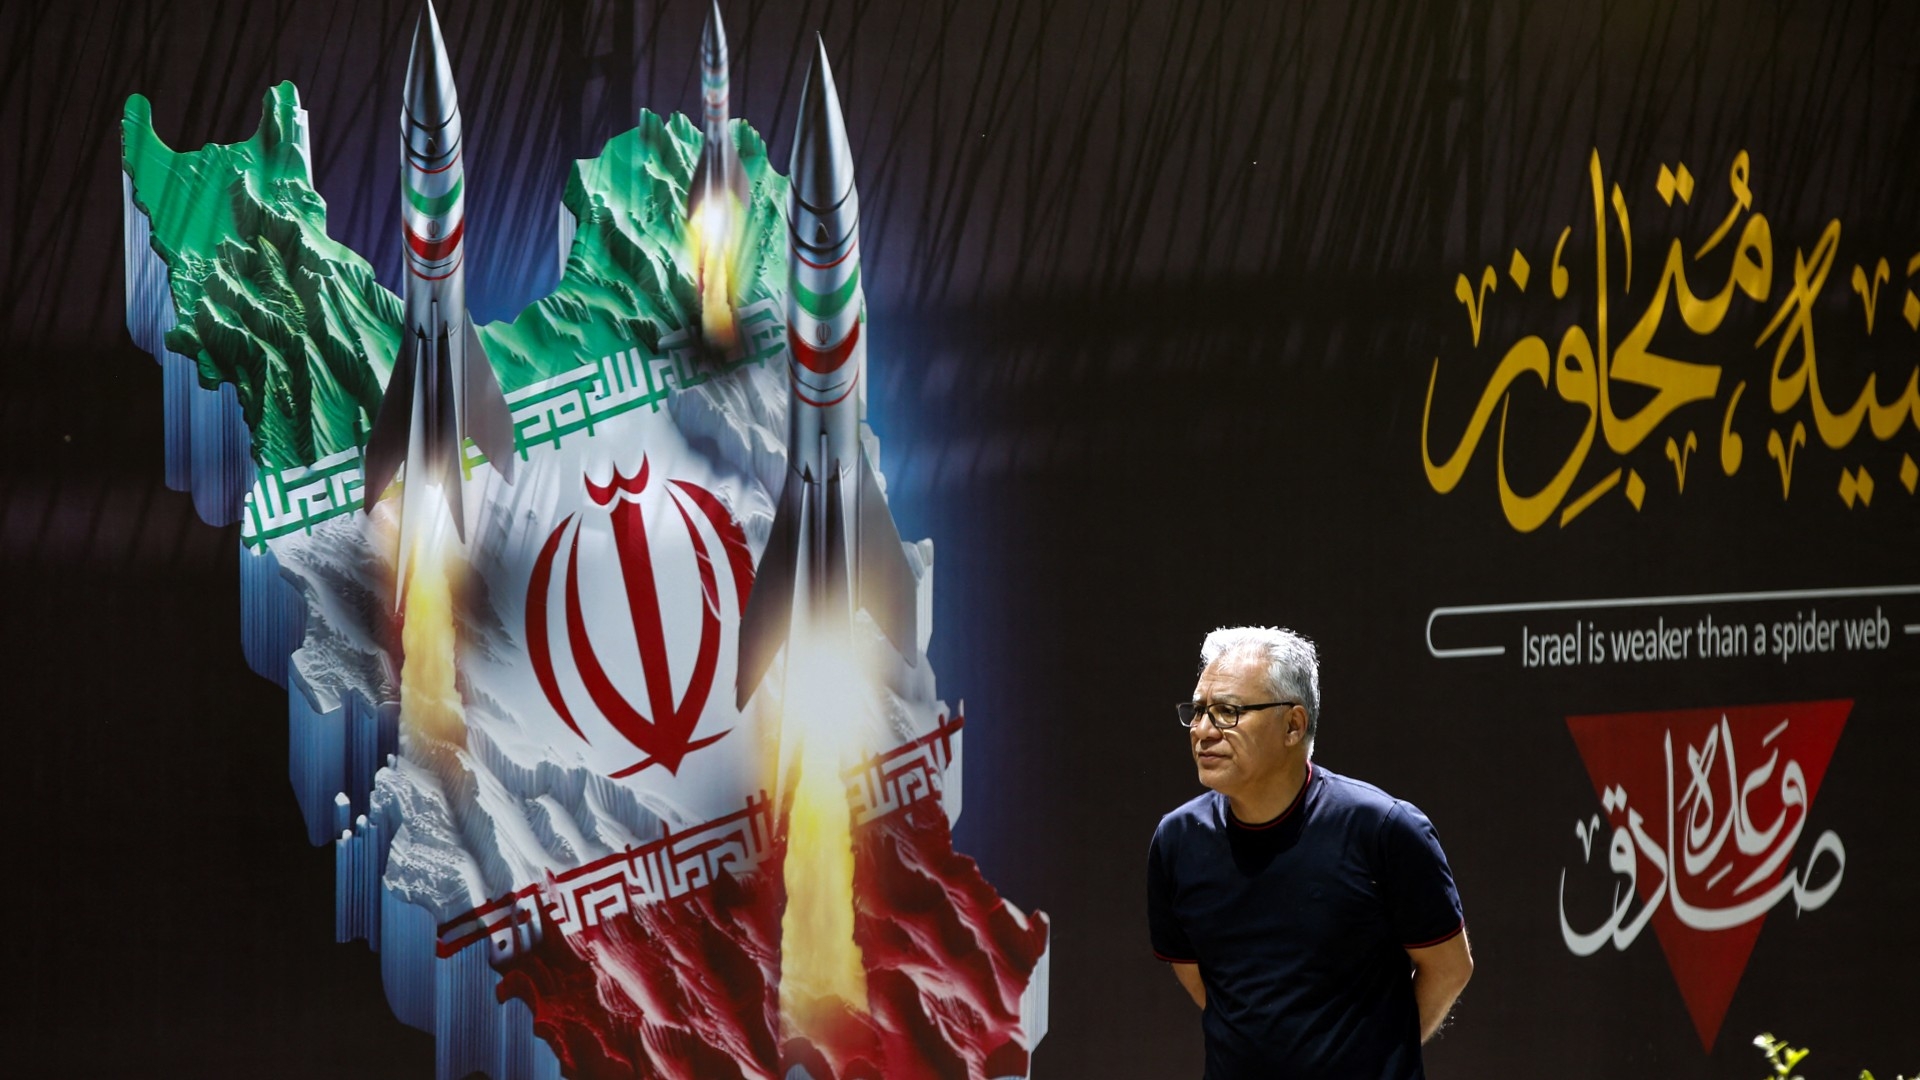 A man walks past a banner depicting missiles along a street in Tehran on 19 April (AFP)